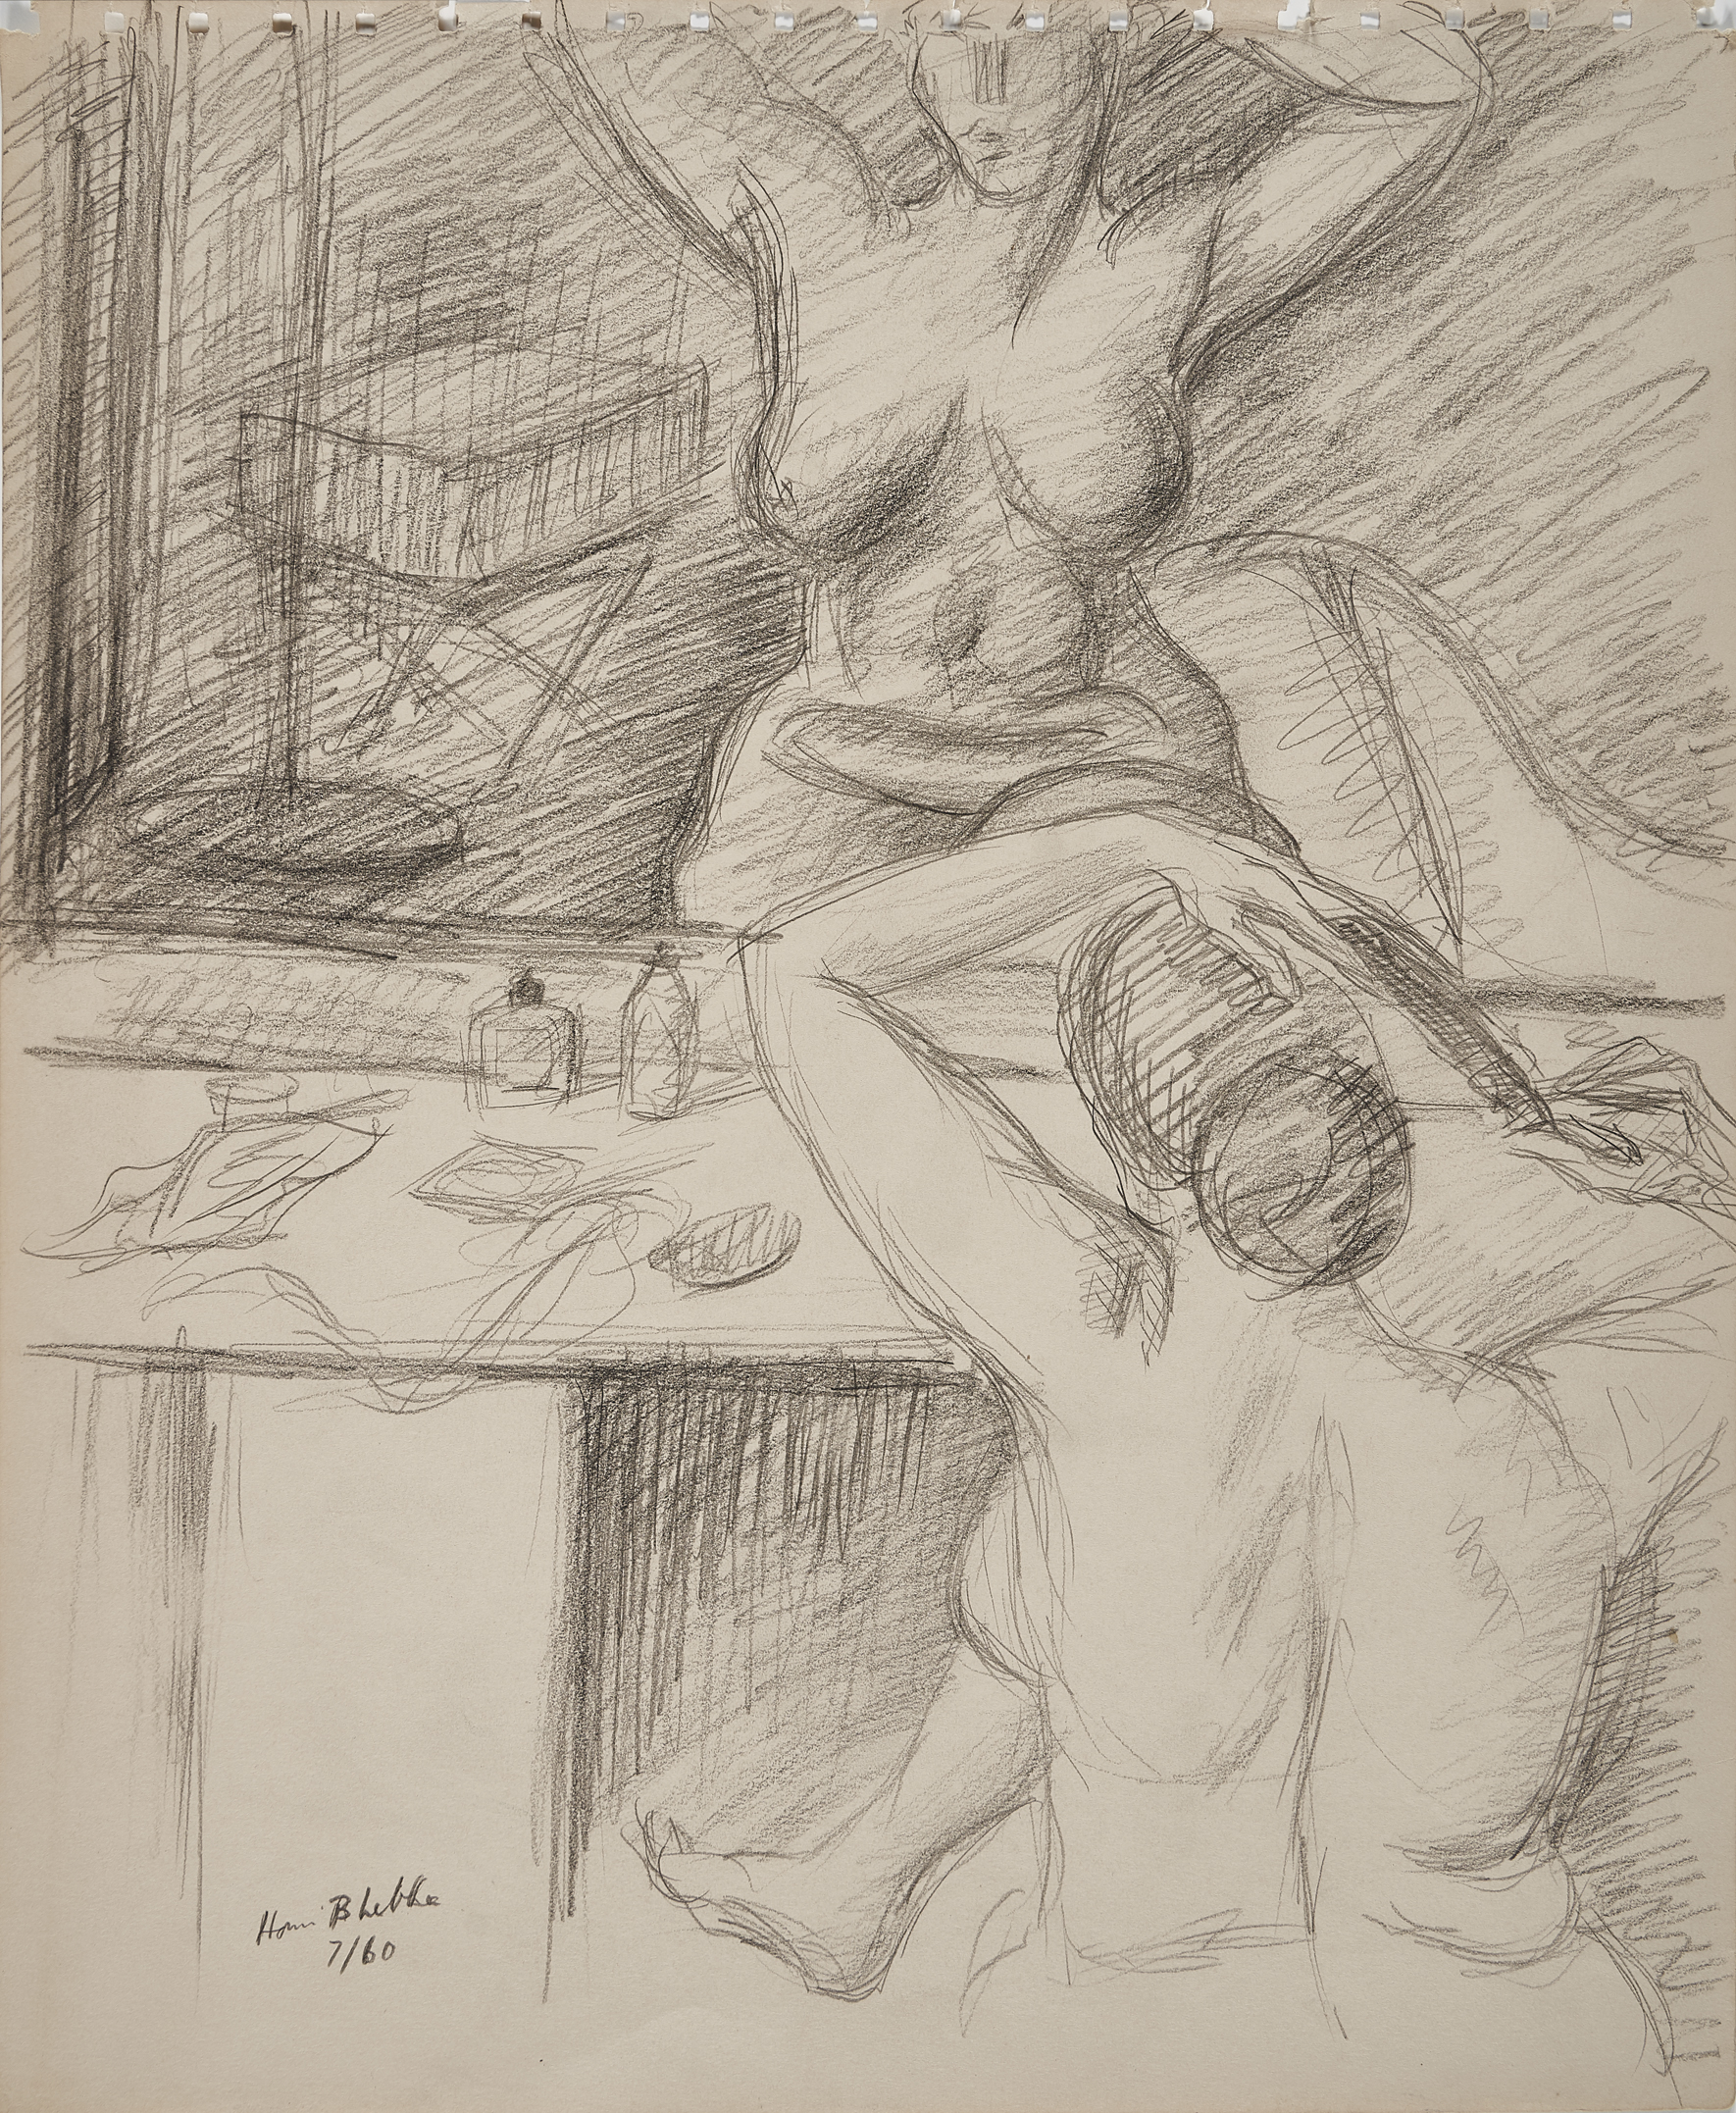 HOMI BHABHA, Lady doing her hair, Pencil on paper, 1960, 16 5/8 x 13 7/8 in.